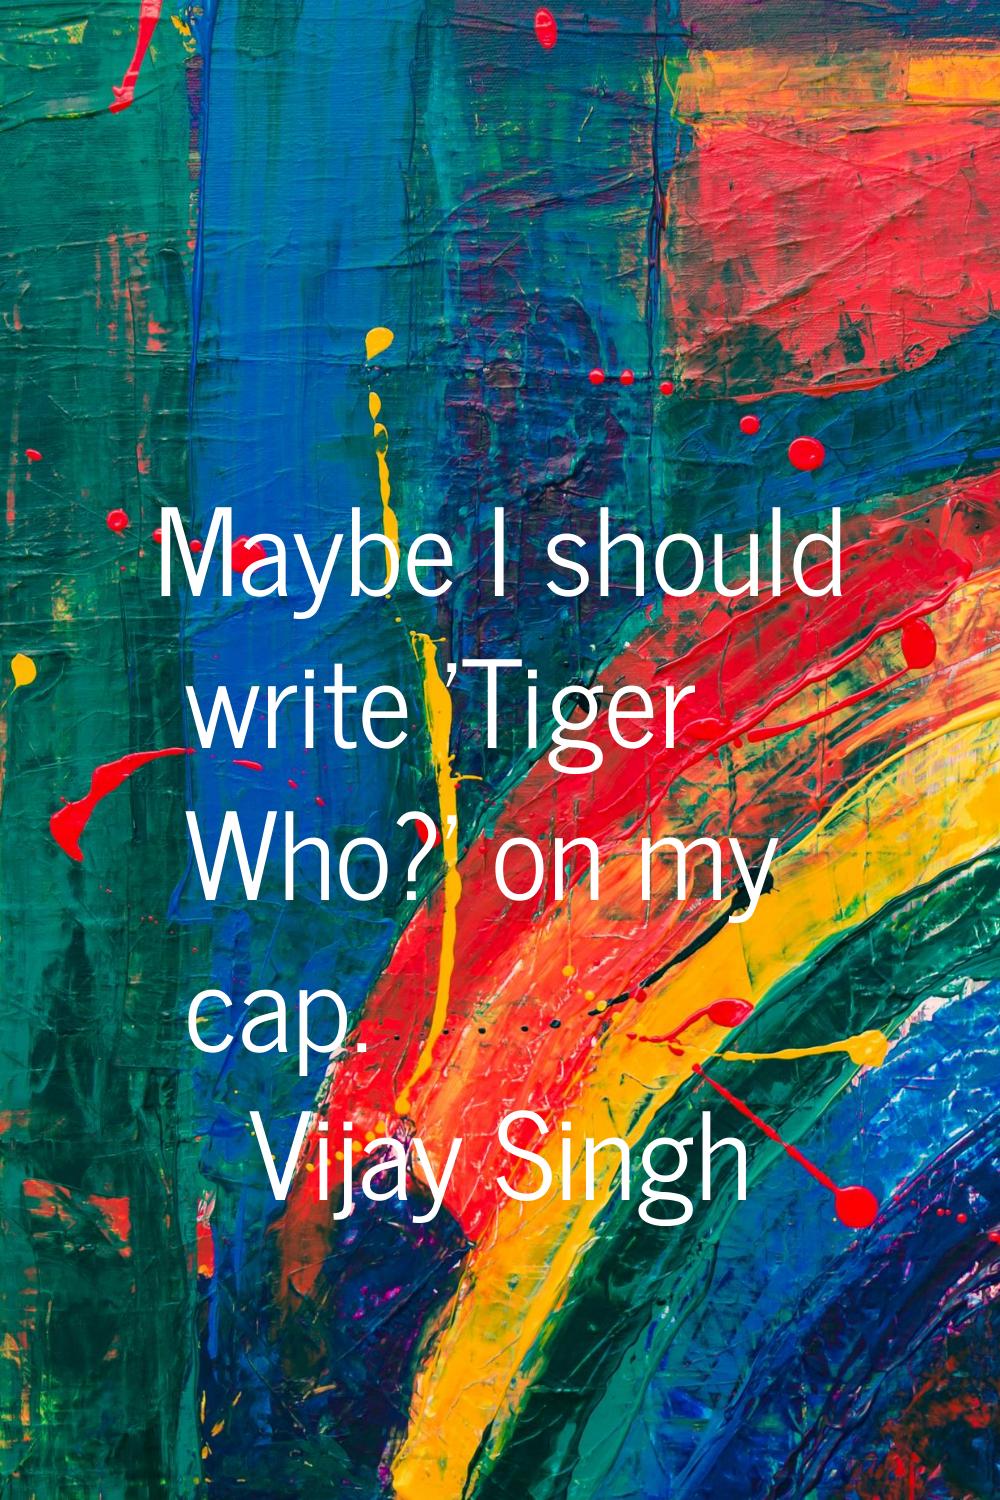 Maybe I should write 'Tiger Who?' on my cap.